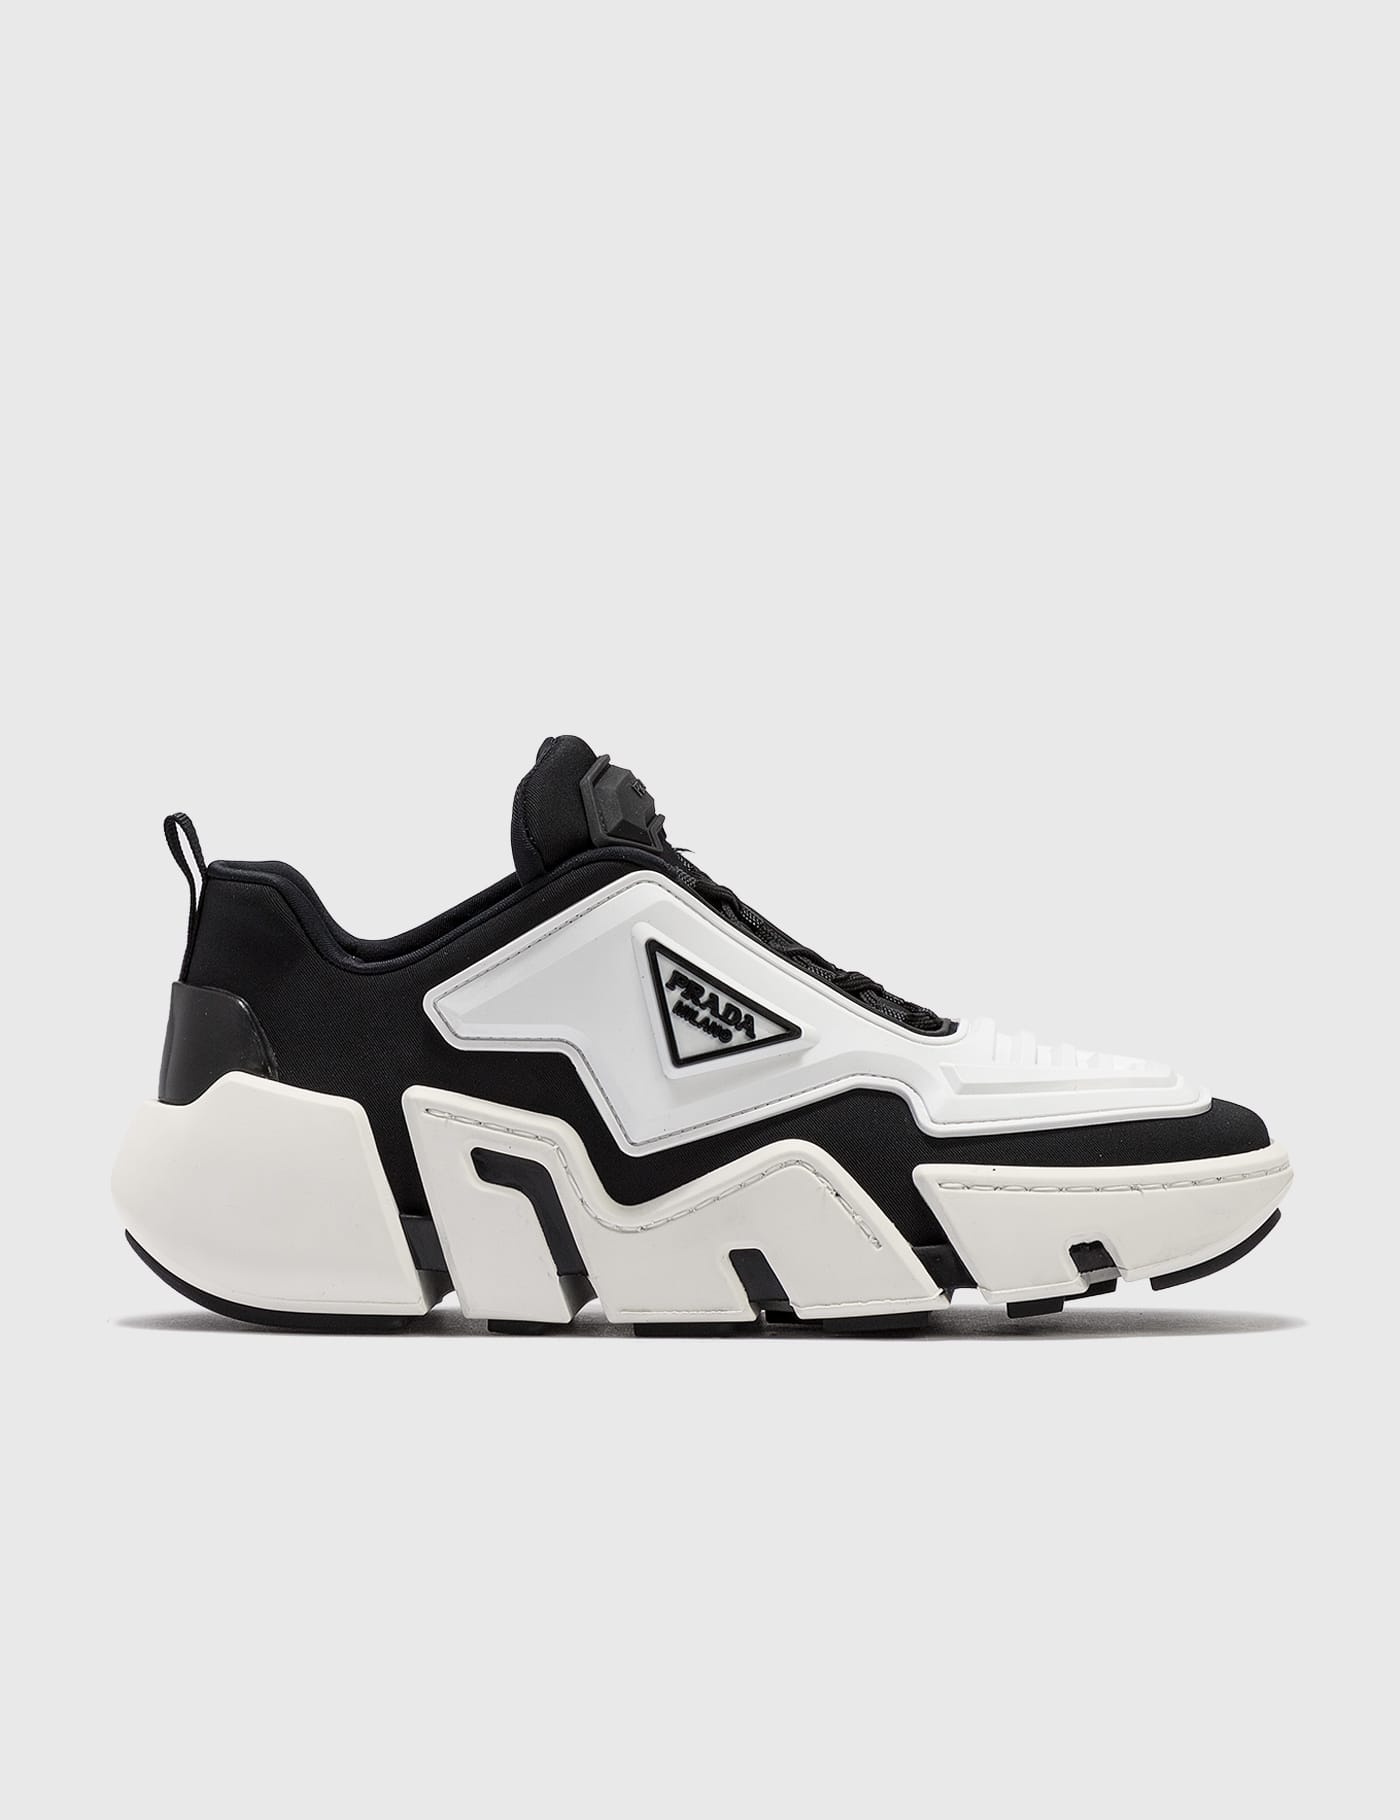 Prada Technical Fabric Sneakers, Buy Now, Flash Sales, 59% OFF,  